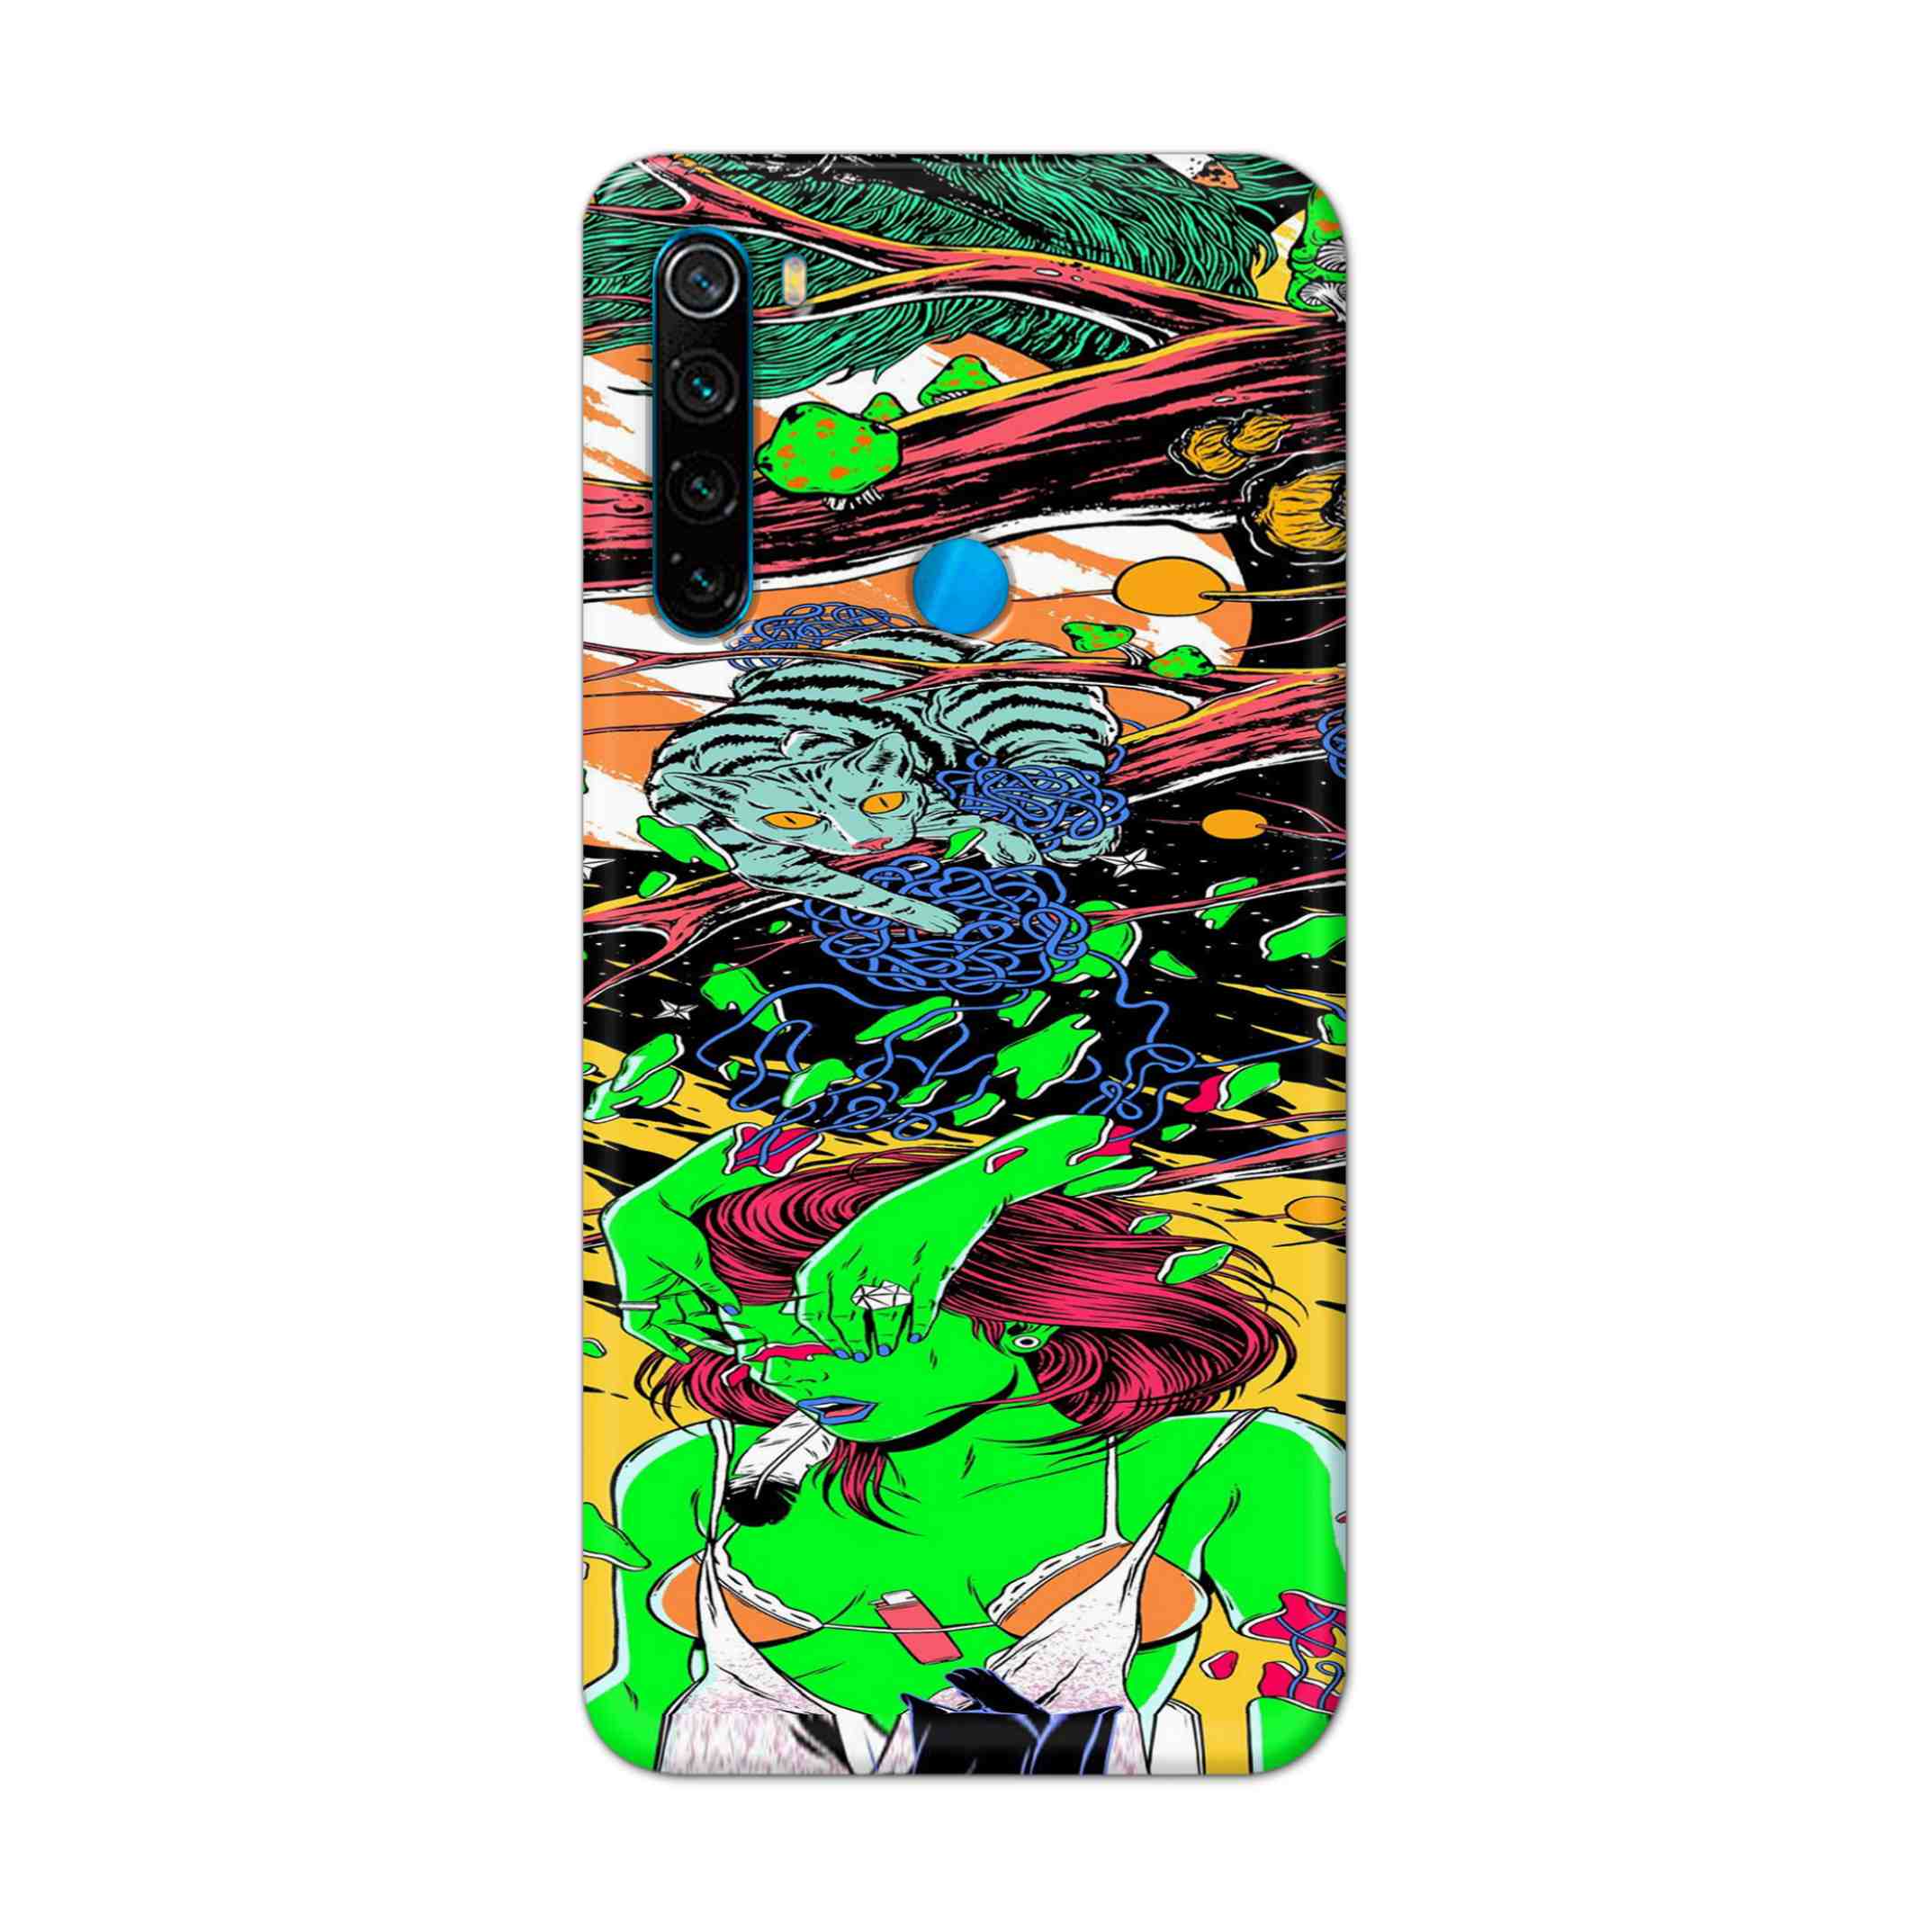 Buy Green Girl Art Hard Back Mobile Phone Case Cover For Xiaomi Redmi Note 8 Online